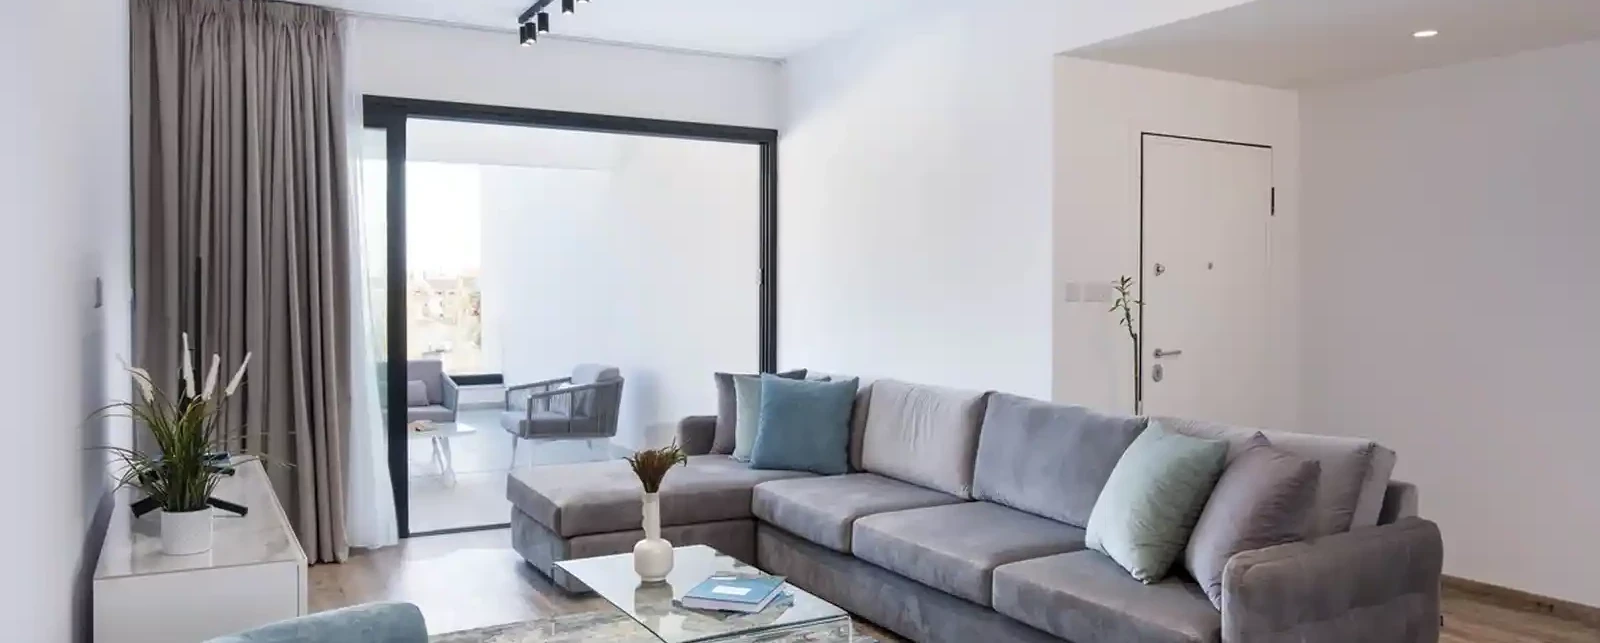 4-bedroom penthouse to rent €4.500, image 1